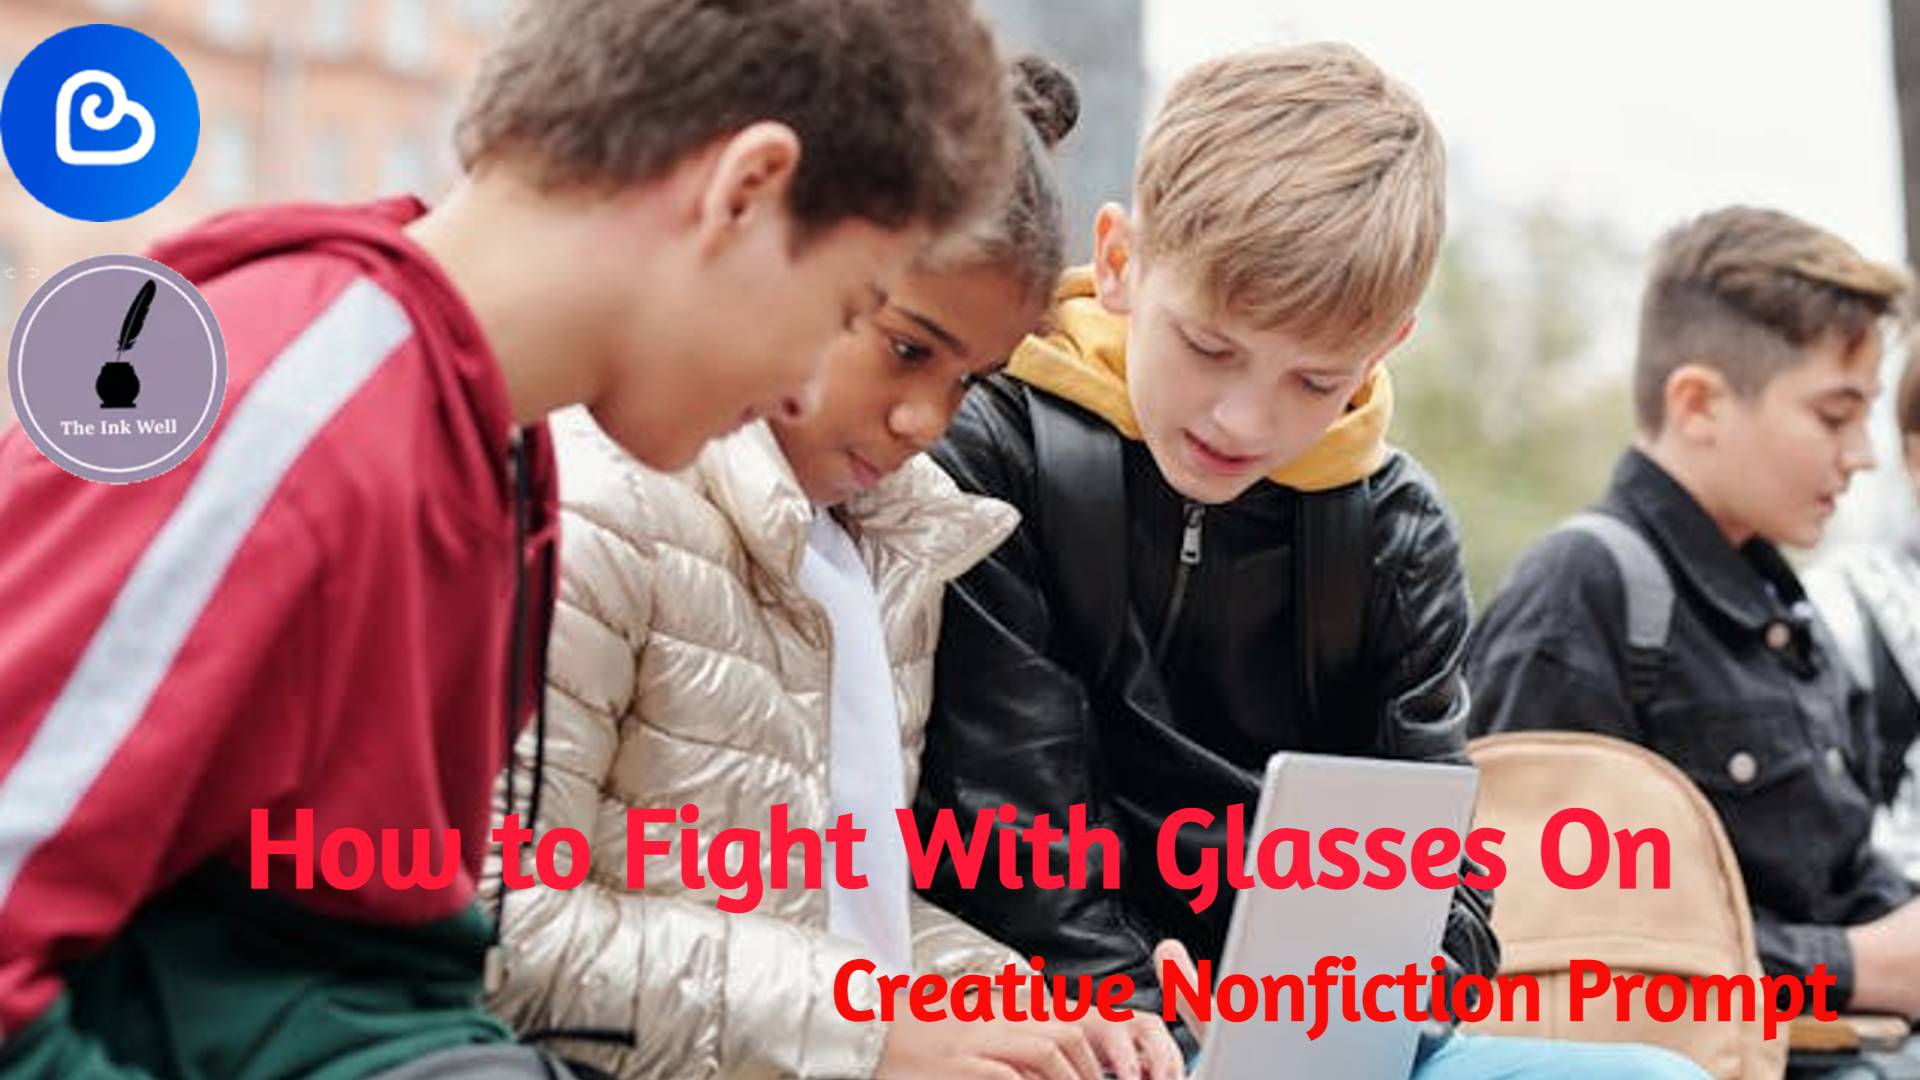 How to Fight With Glasses On | De Como Pelear Con los Lentes Puestos | The Ink Well Nonfiction Prompt